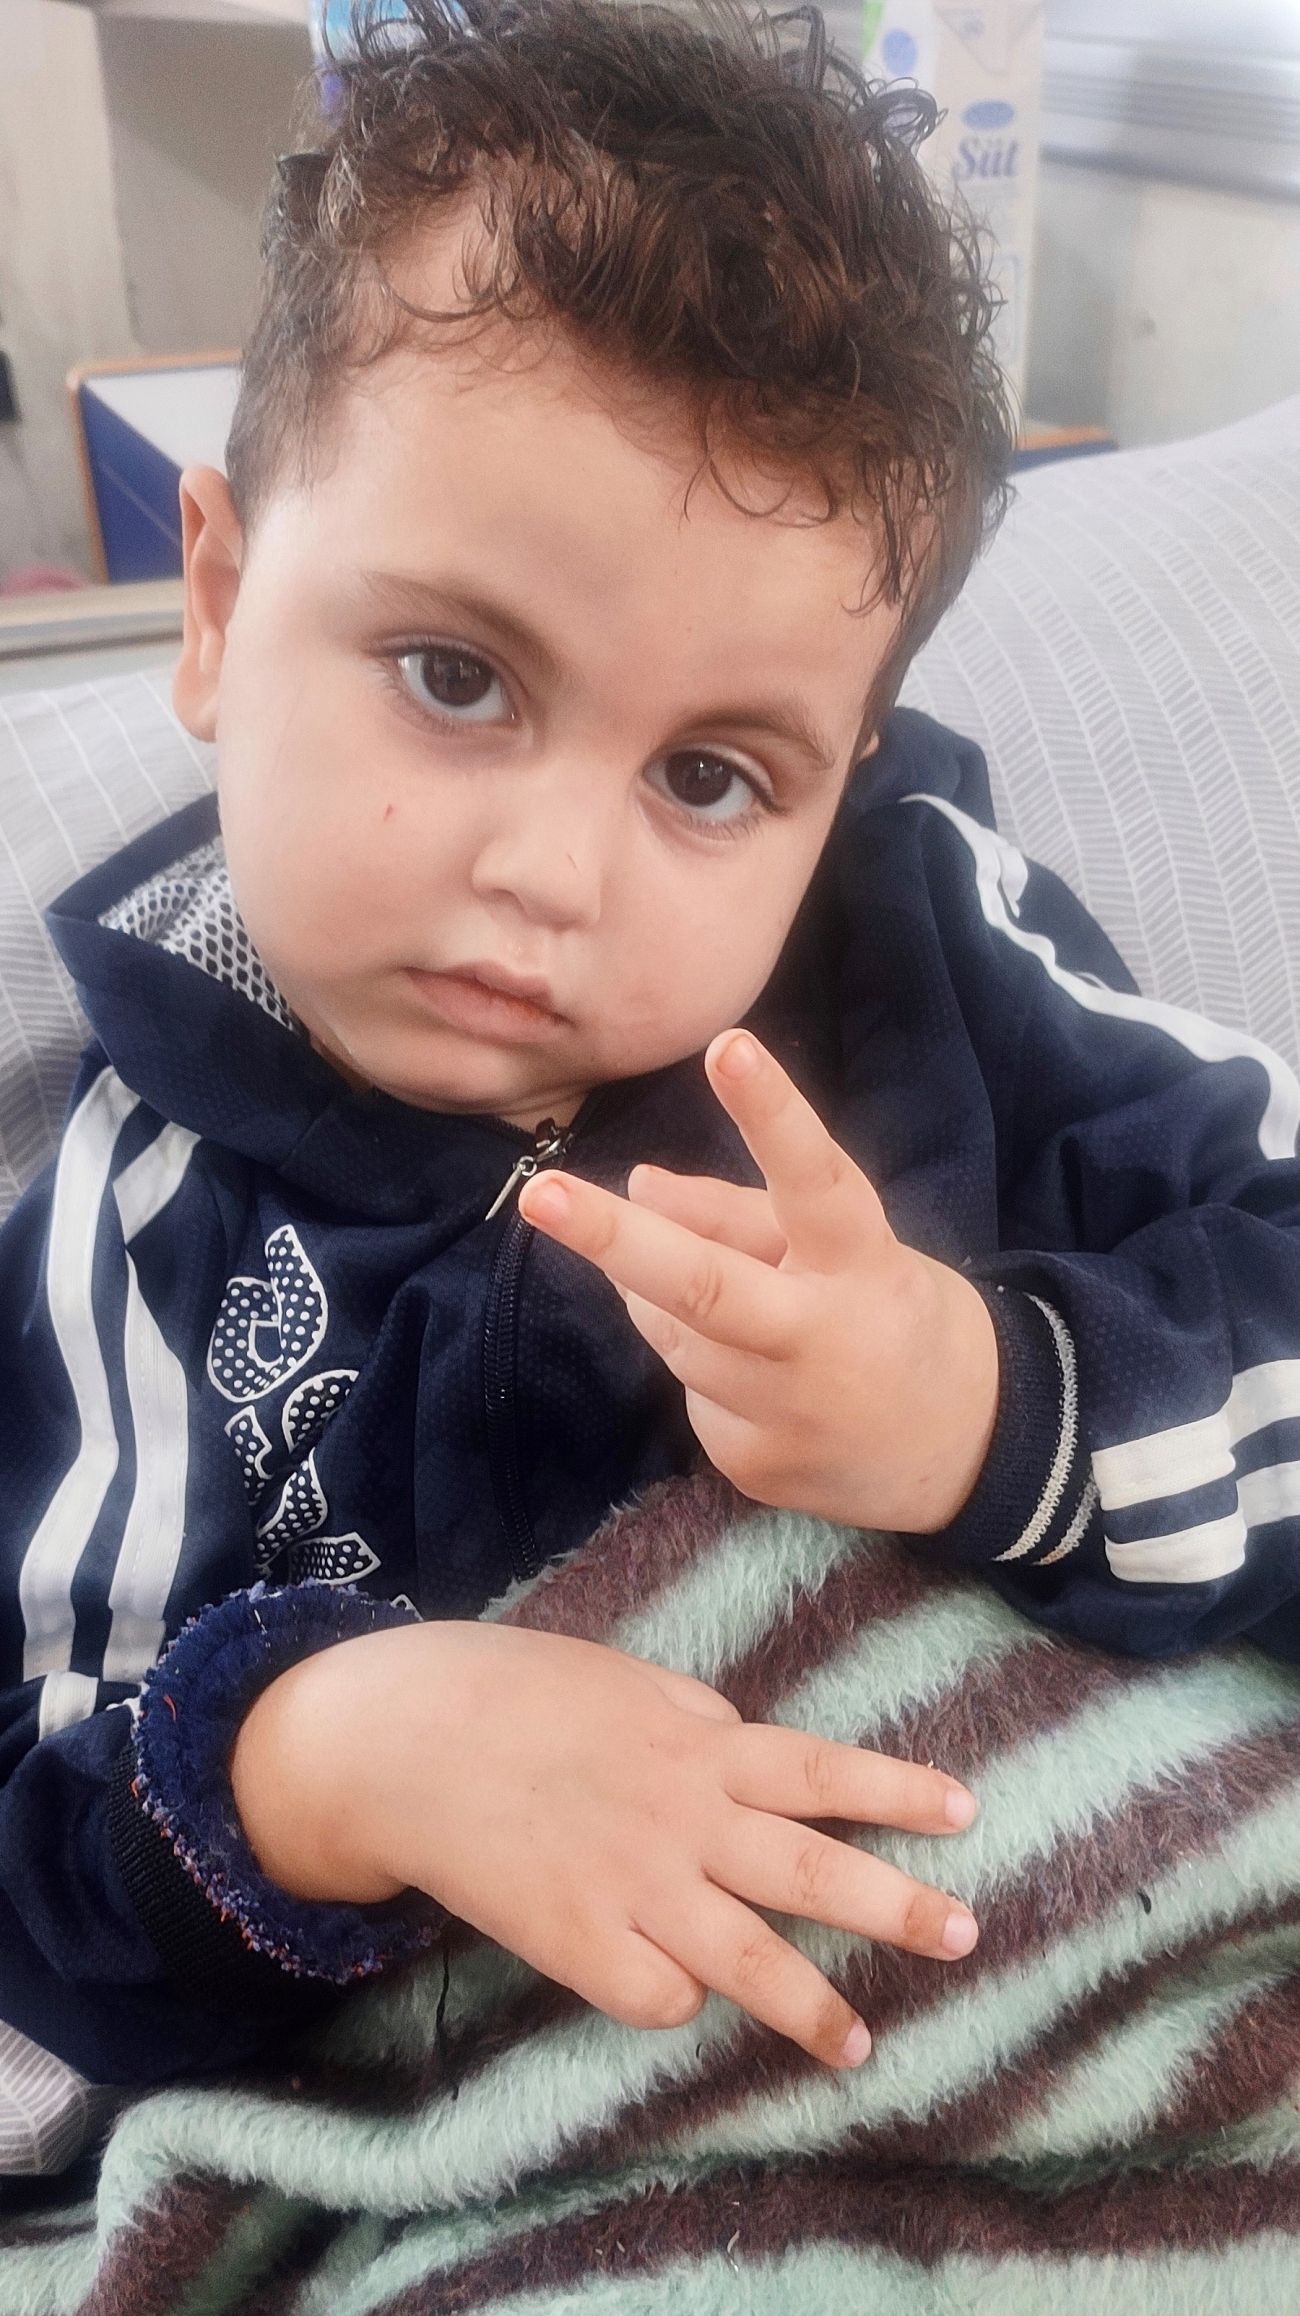 Close up portrait of a young toddler boy, holding up two fingers